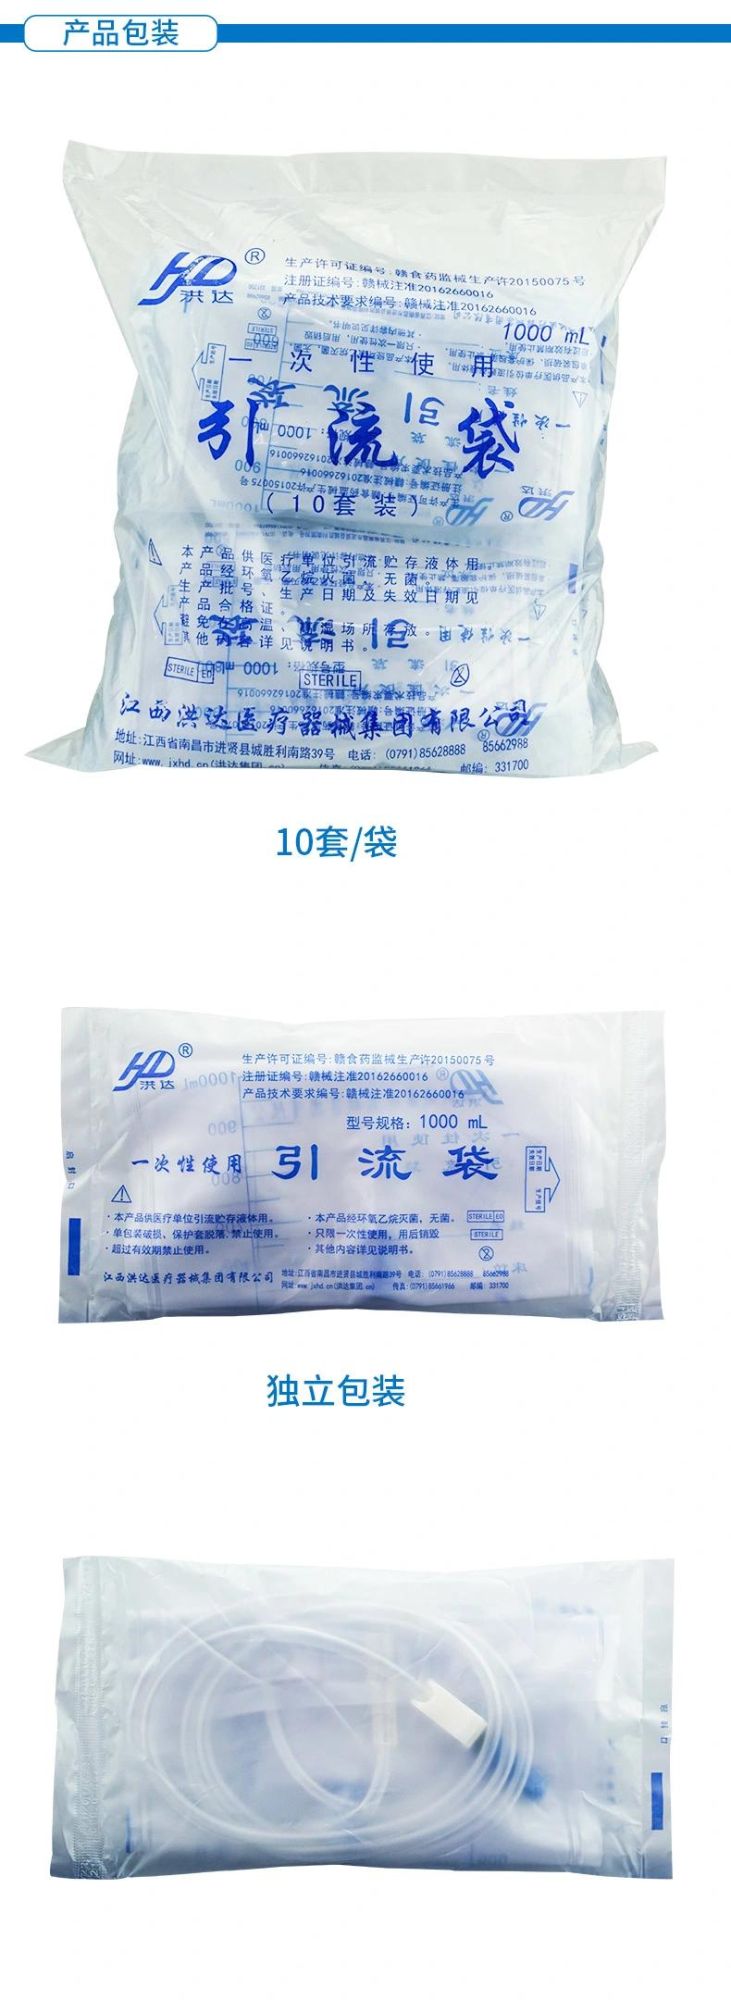 Disposable Urine Bag Drainage Bag 1000ml Medical Connection Catheter Urine Bag for Urinary Incontinence for Men and Women